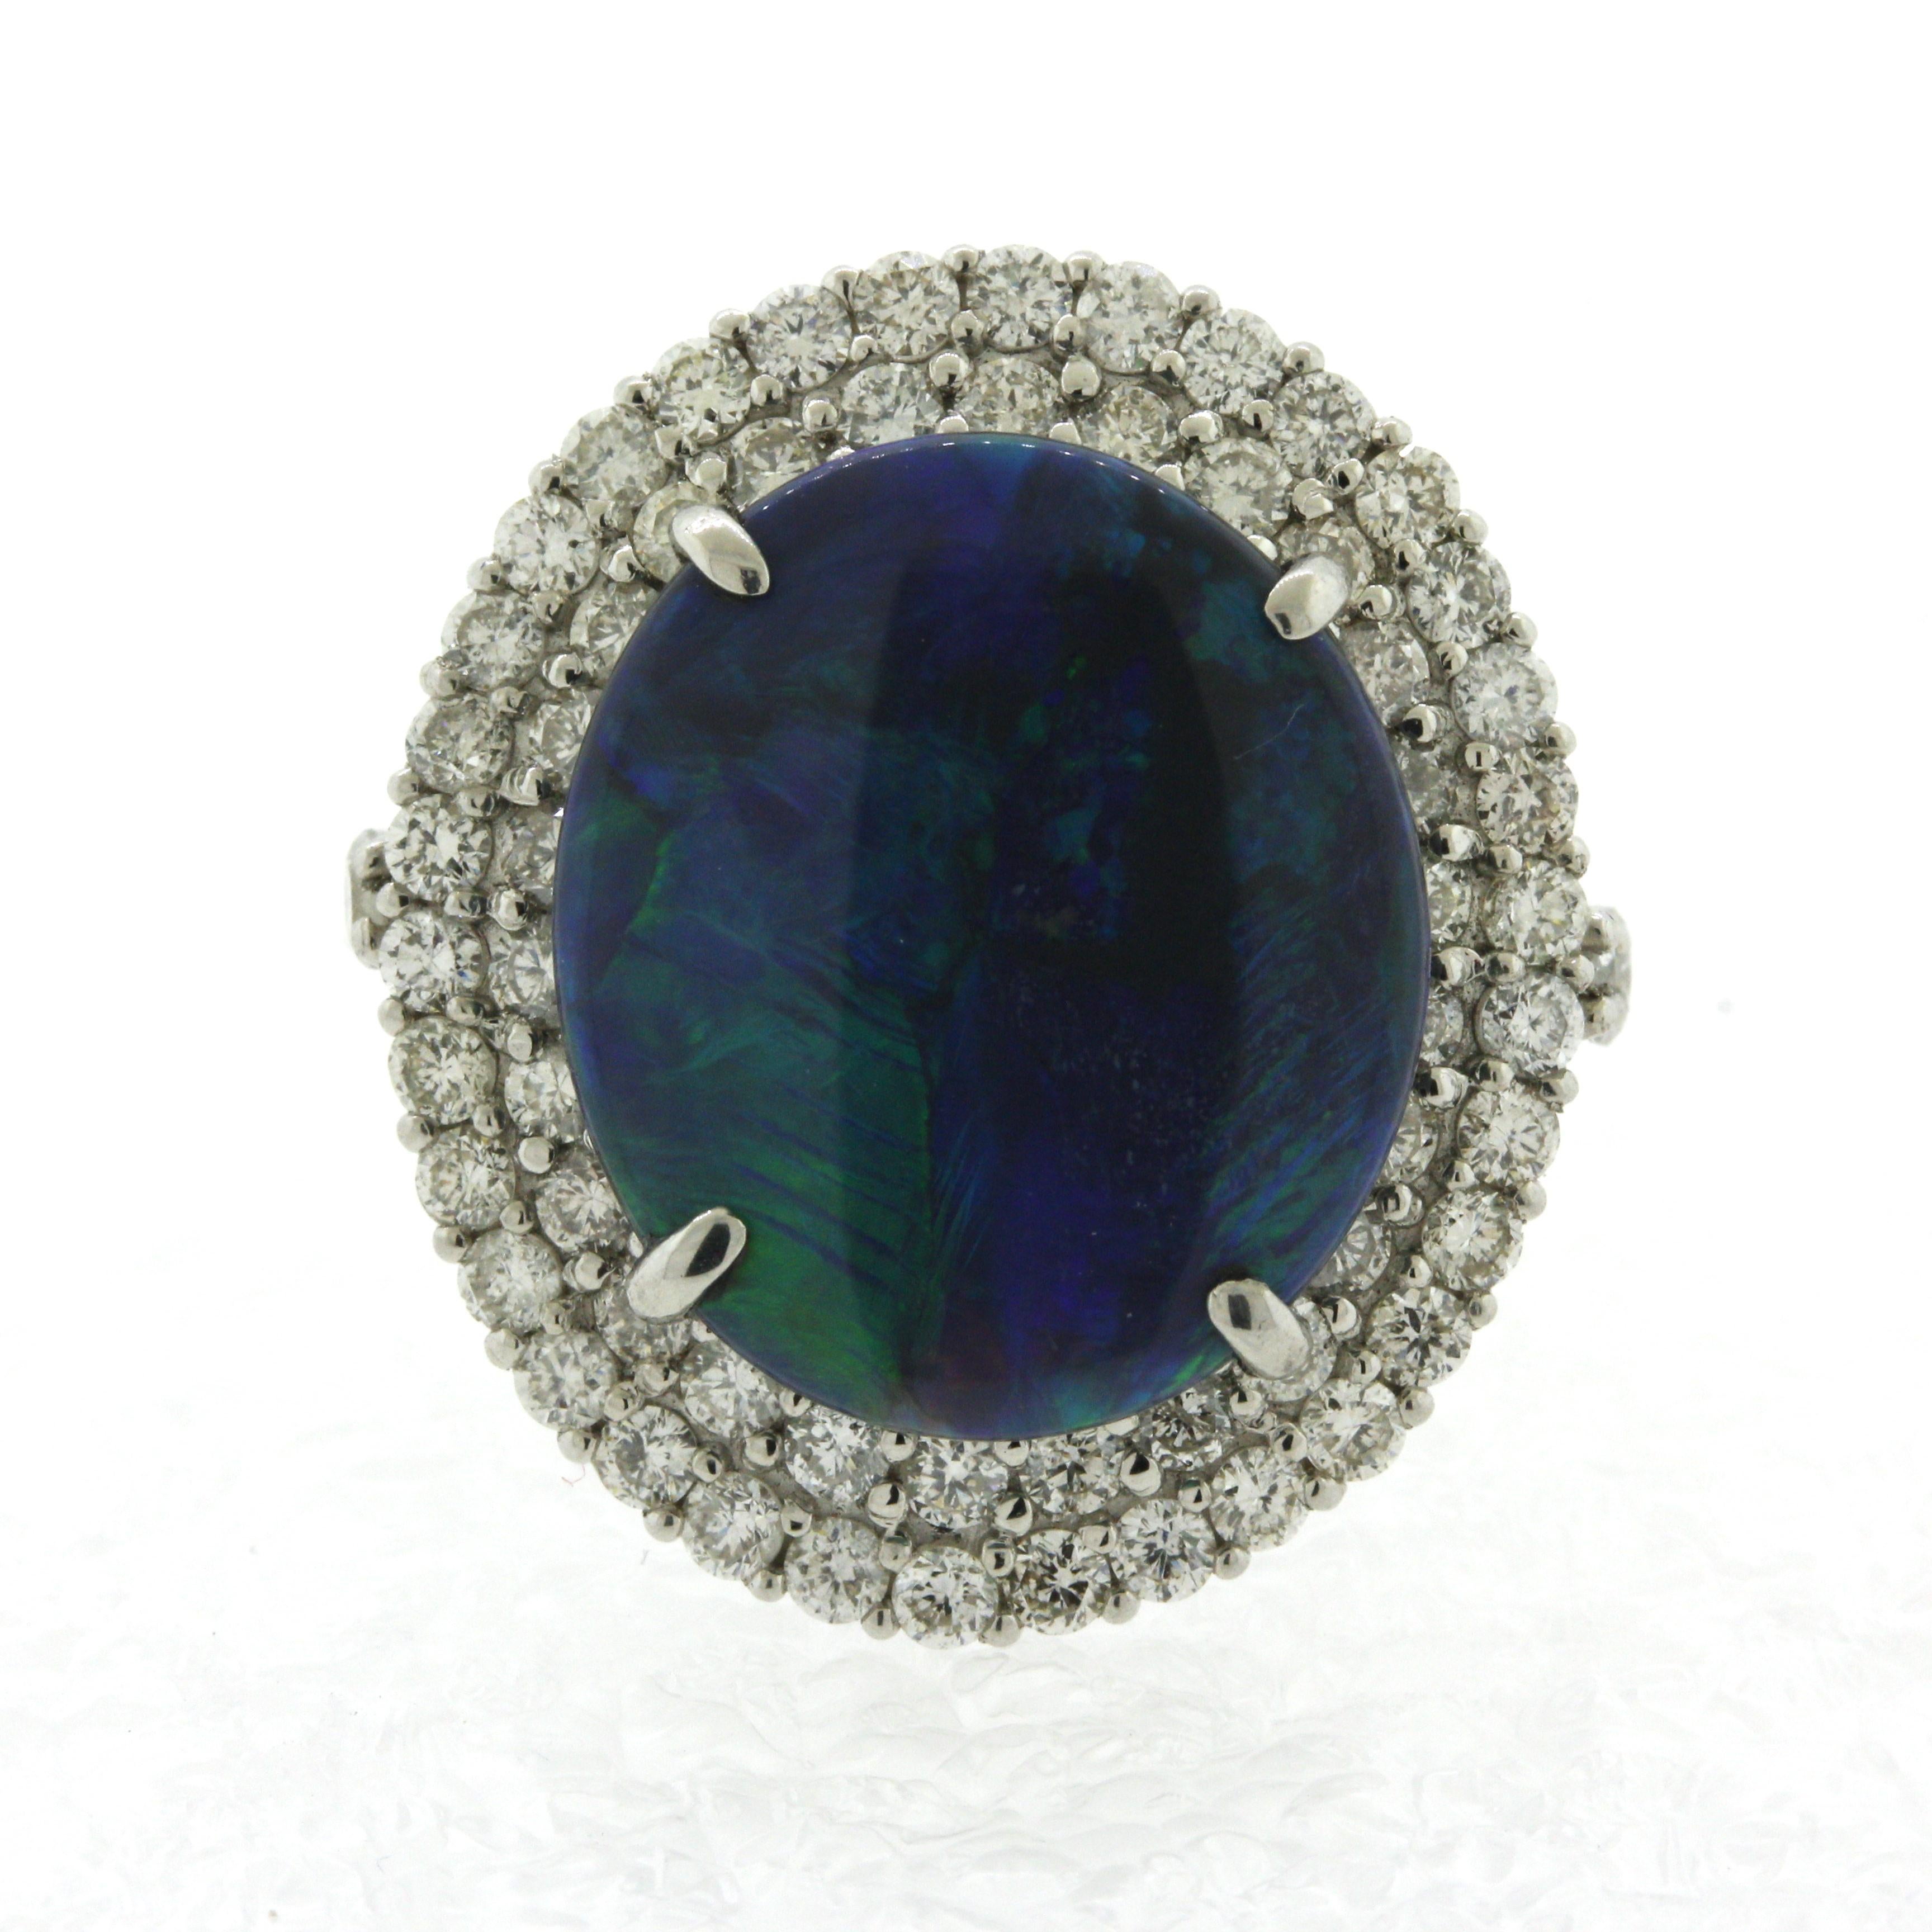 A classic black opal from Australia with a beautiful blue-green play of color. The opal weighs 2.01 carats and has a deep black body color allowing the flashes of blue and green to shine bright and contrast with the body. It is complemented by 1.63